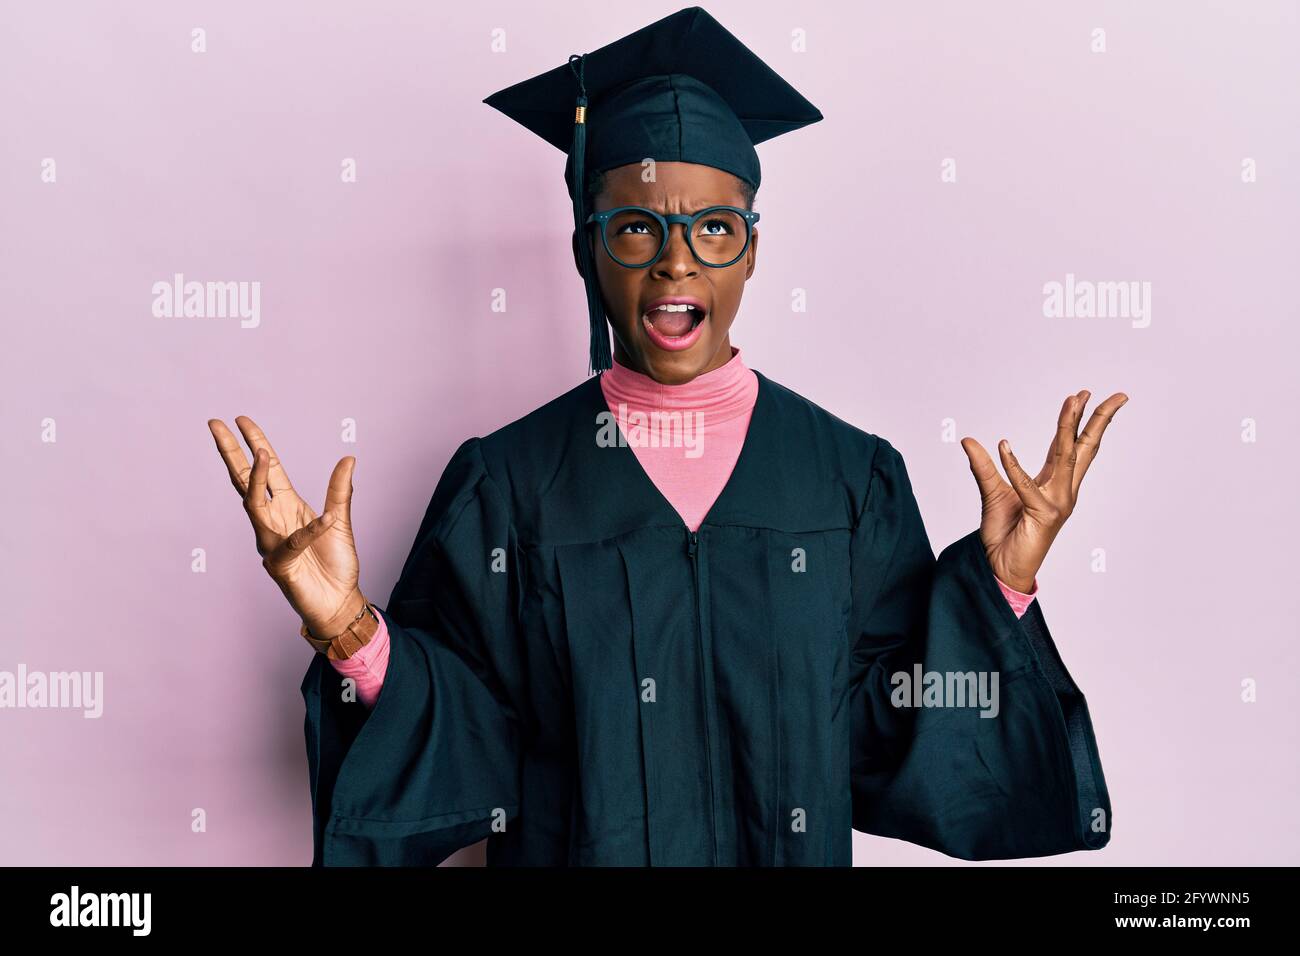 Young african american girl wearing graduation cap and ceremony robe crazy and mad shouting and yelling with aggressive expression and arms raised. fr Stock Photo